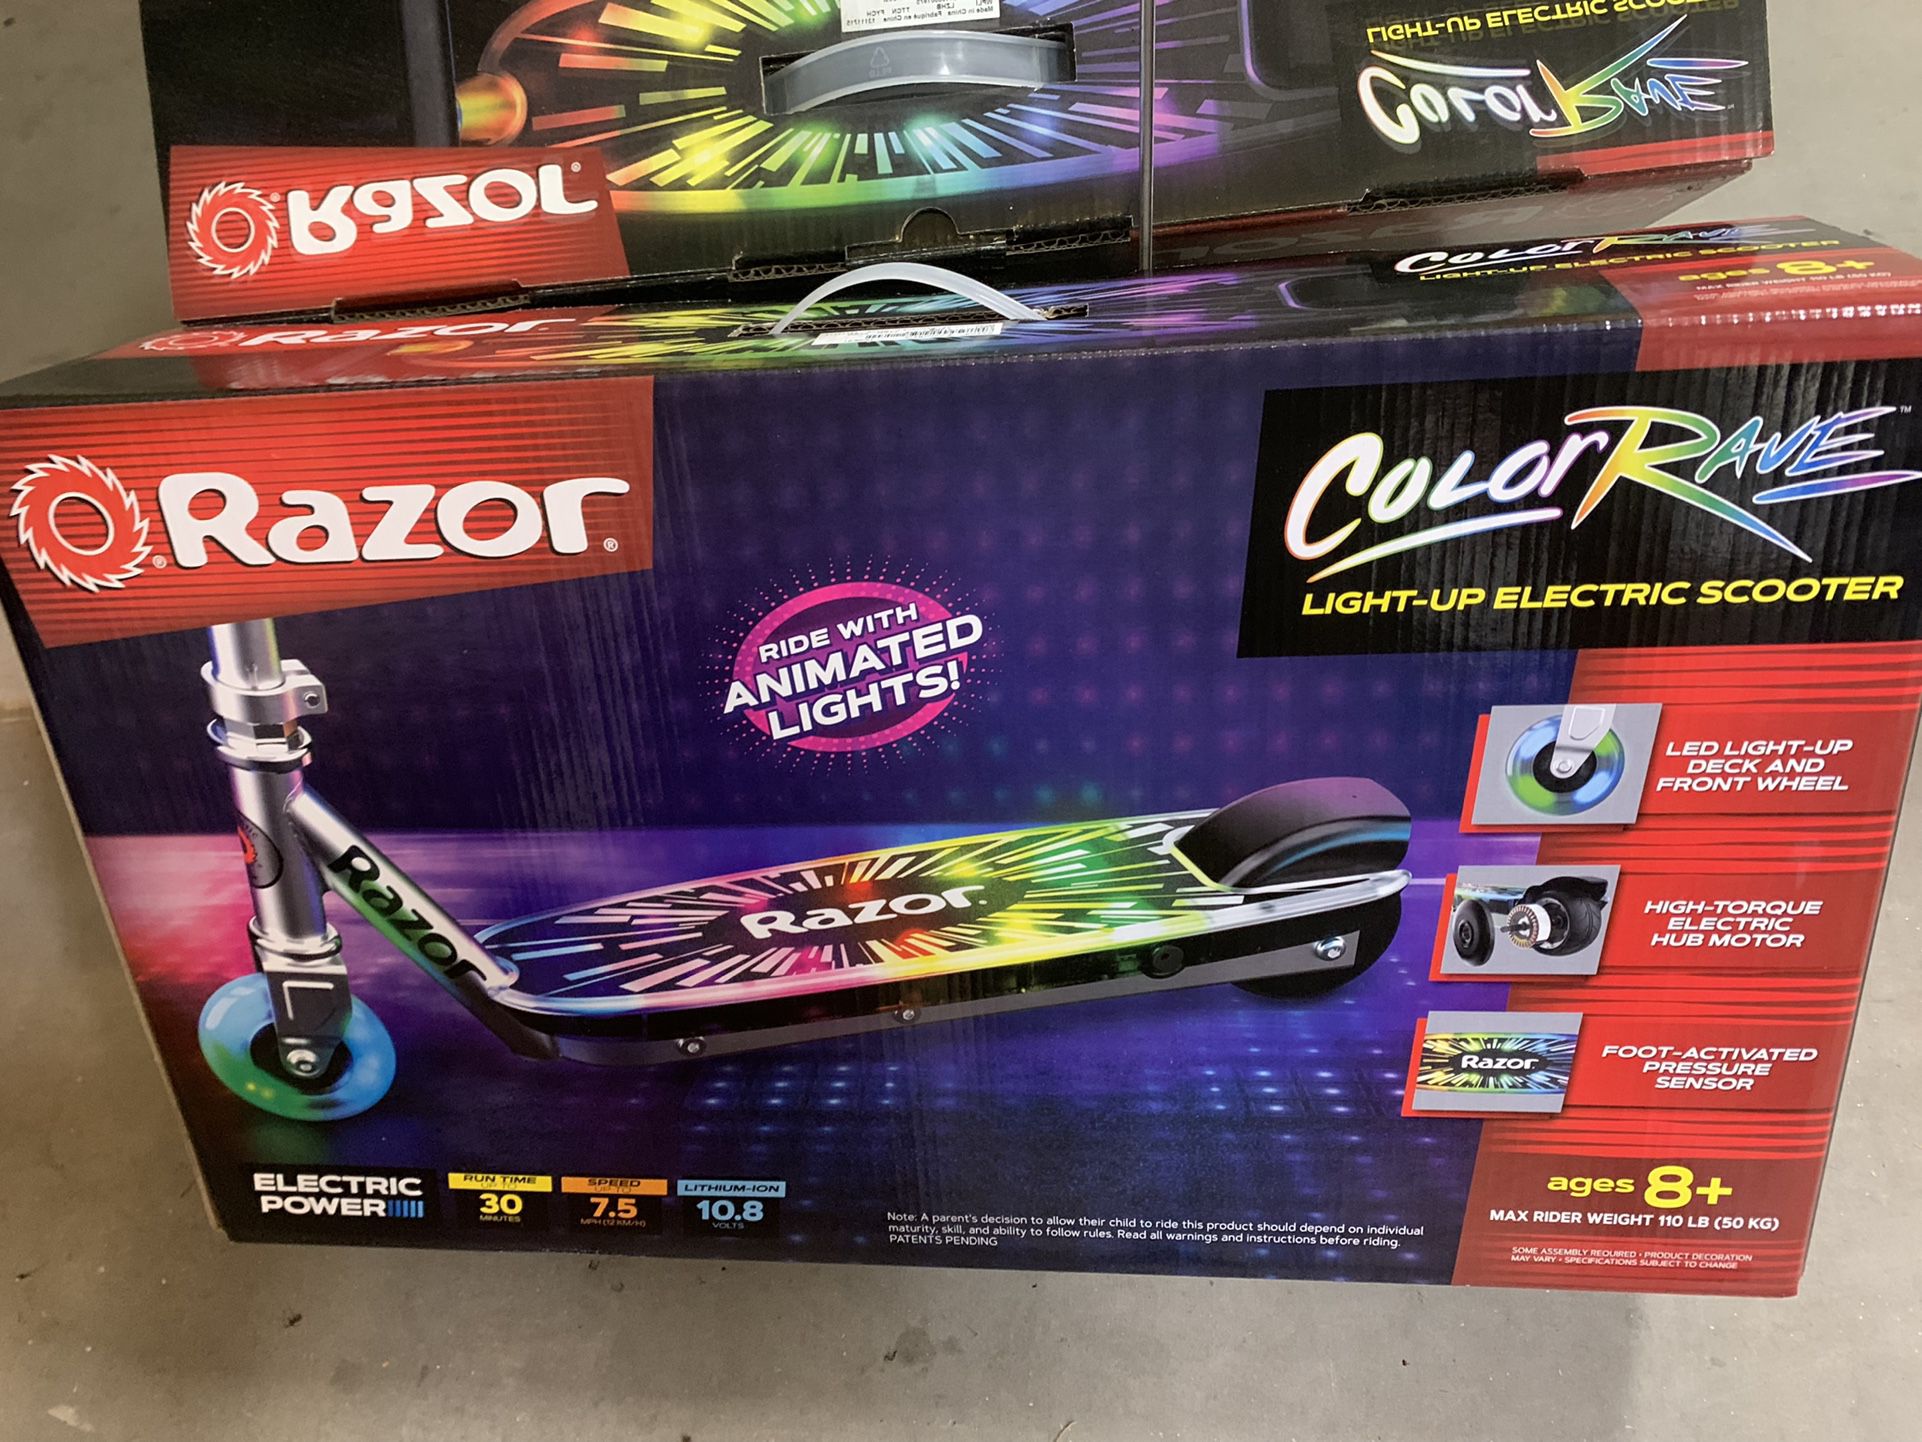 Razor Light-Up Electric Scooter